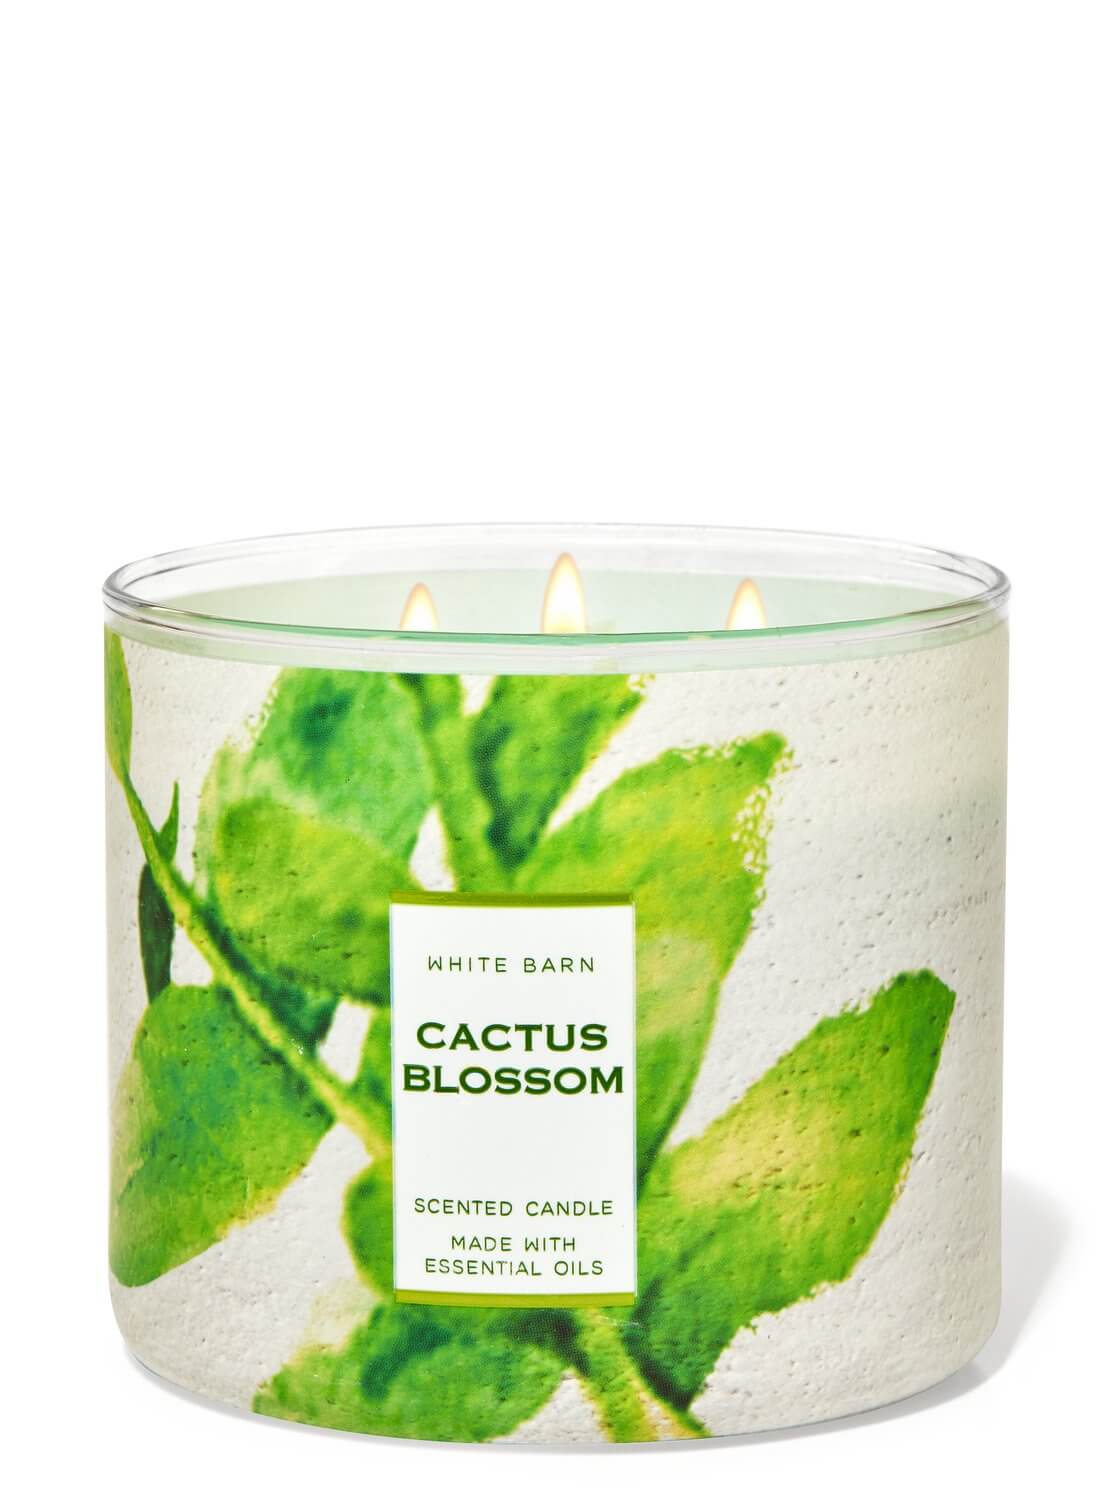 Bath & Body Works Cactus Blossom White Barn 3-Wick Candle